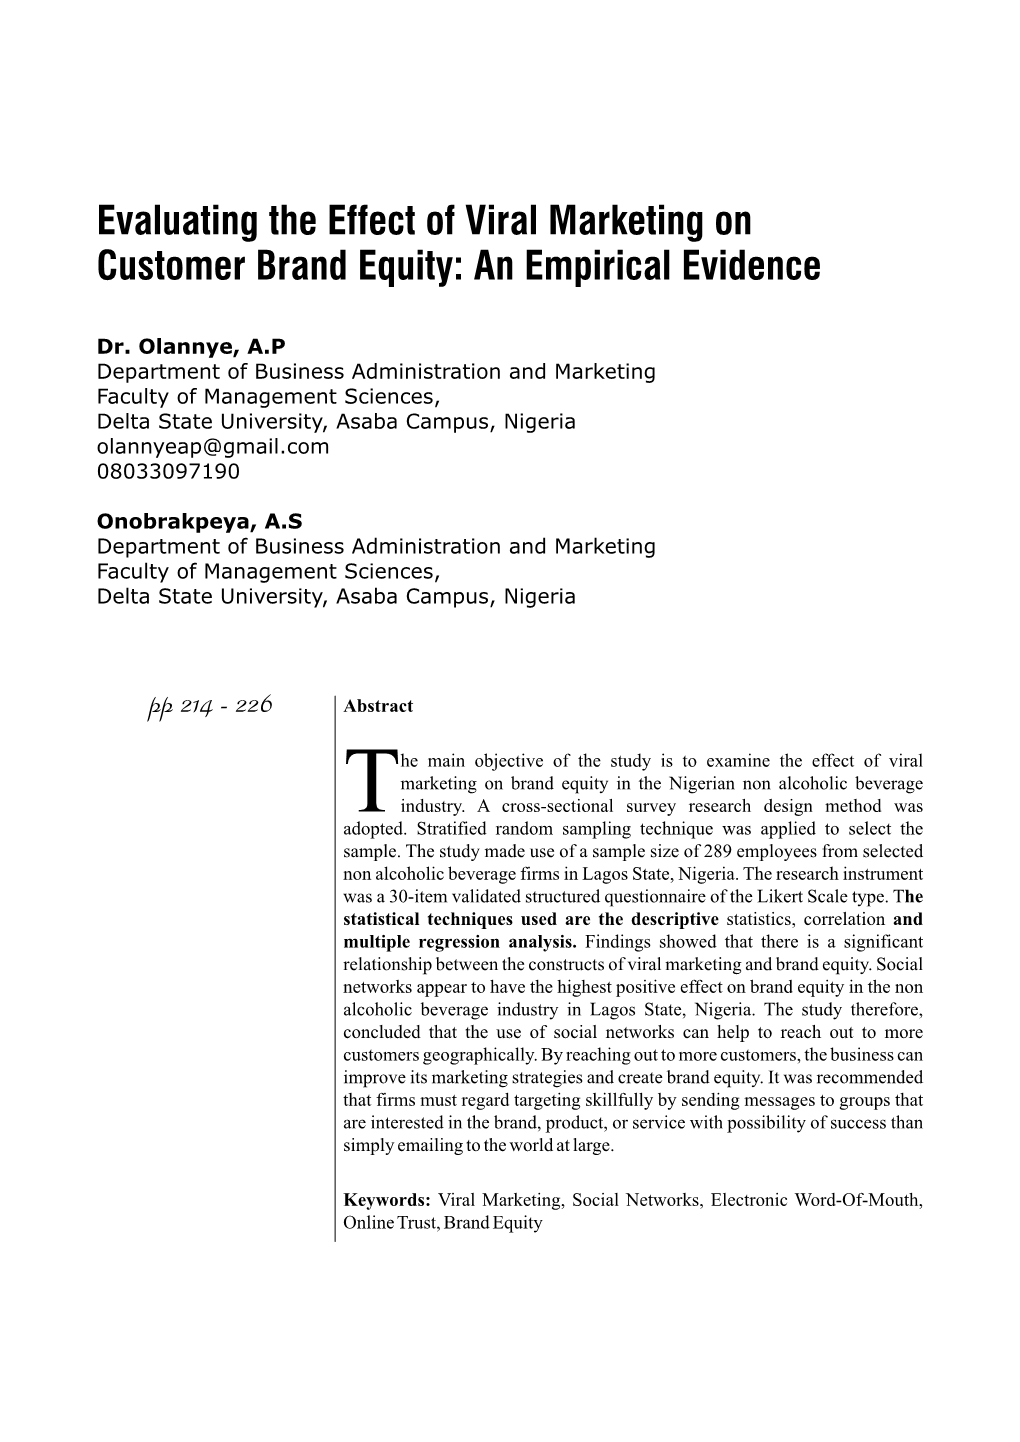 24. Evaluating the Effect of Viral Marketing on Customer Brand Equity